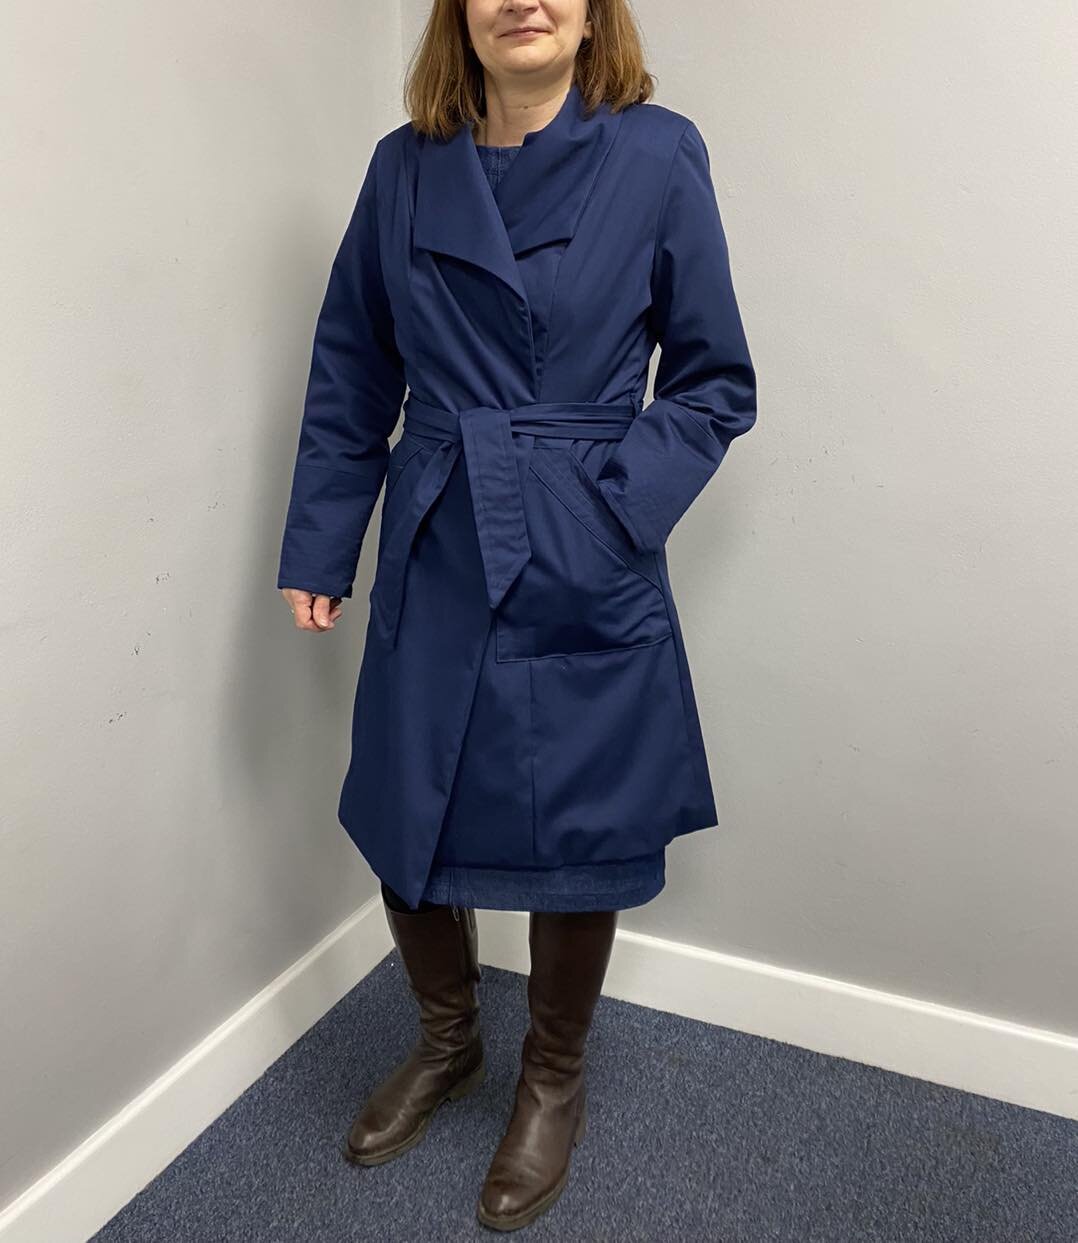 🧵 Jane has finished her trench coat! 🧵 The project brief a few terms ago was &lsquo;outer wear&rsquo; and this is the gorgeous result. It has such a beautiful lining and some really nice decorative stitching on the pockets and cuffs. The fit is won